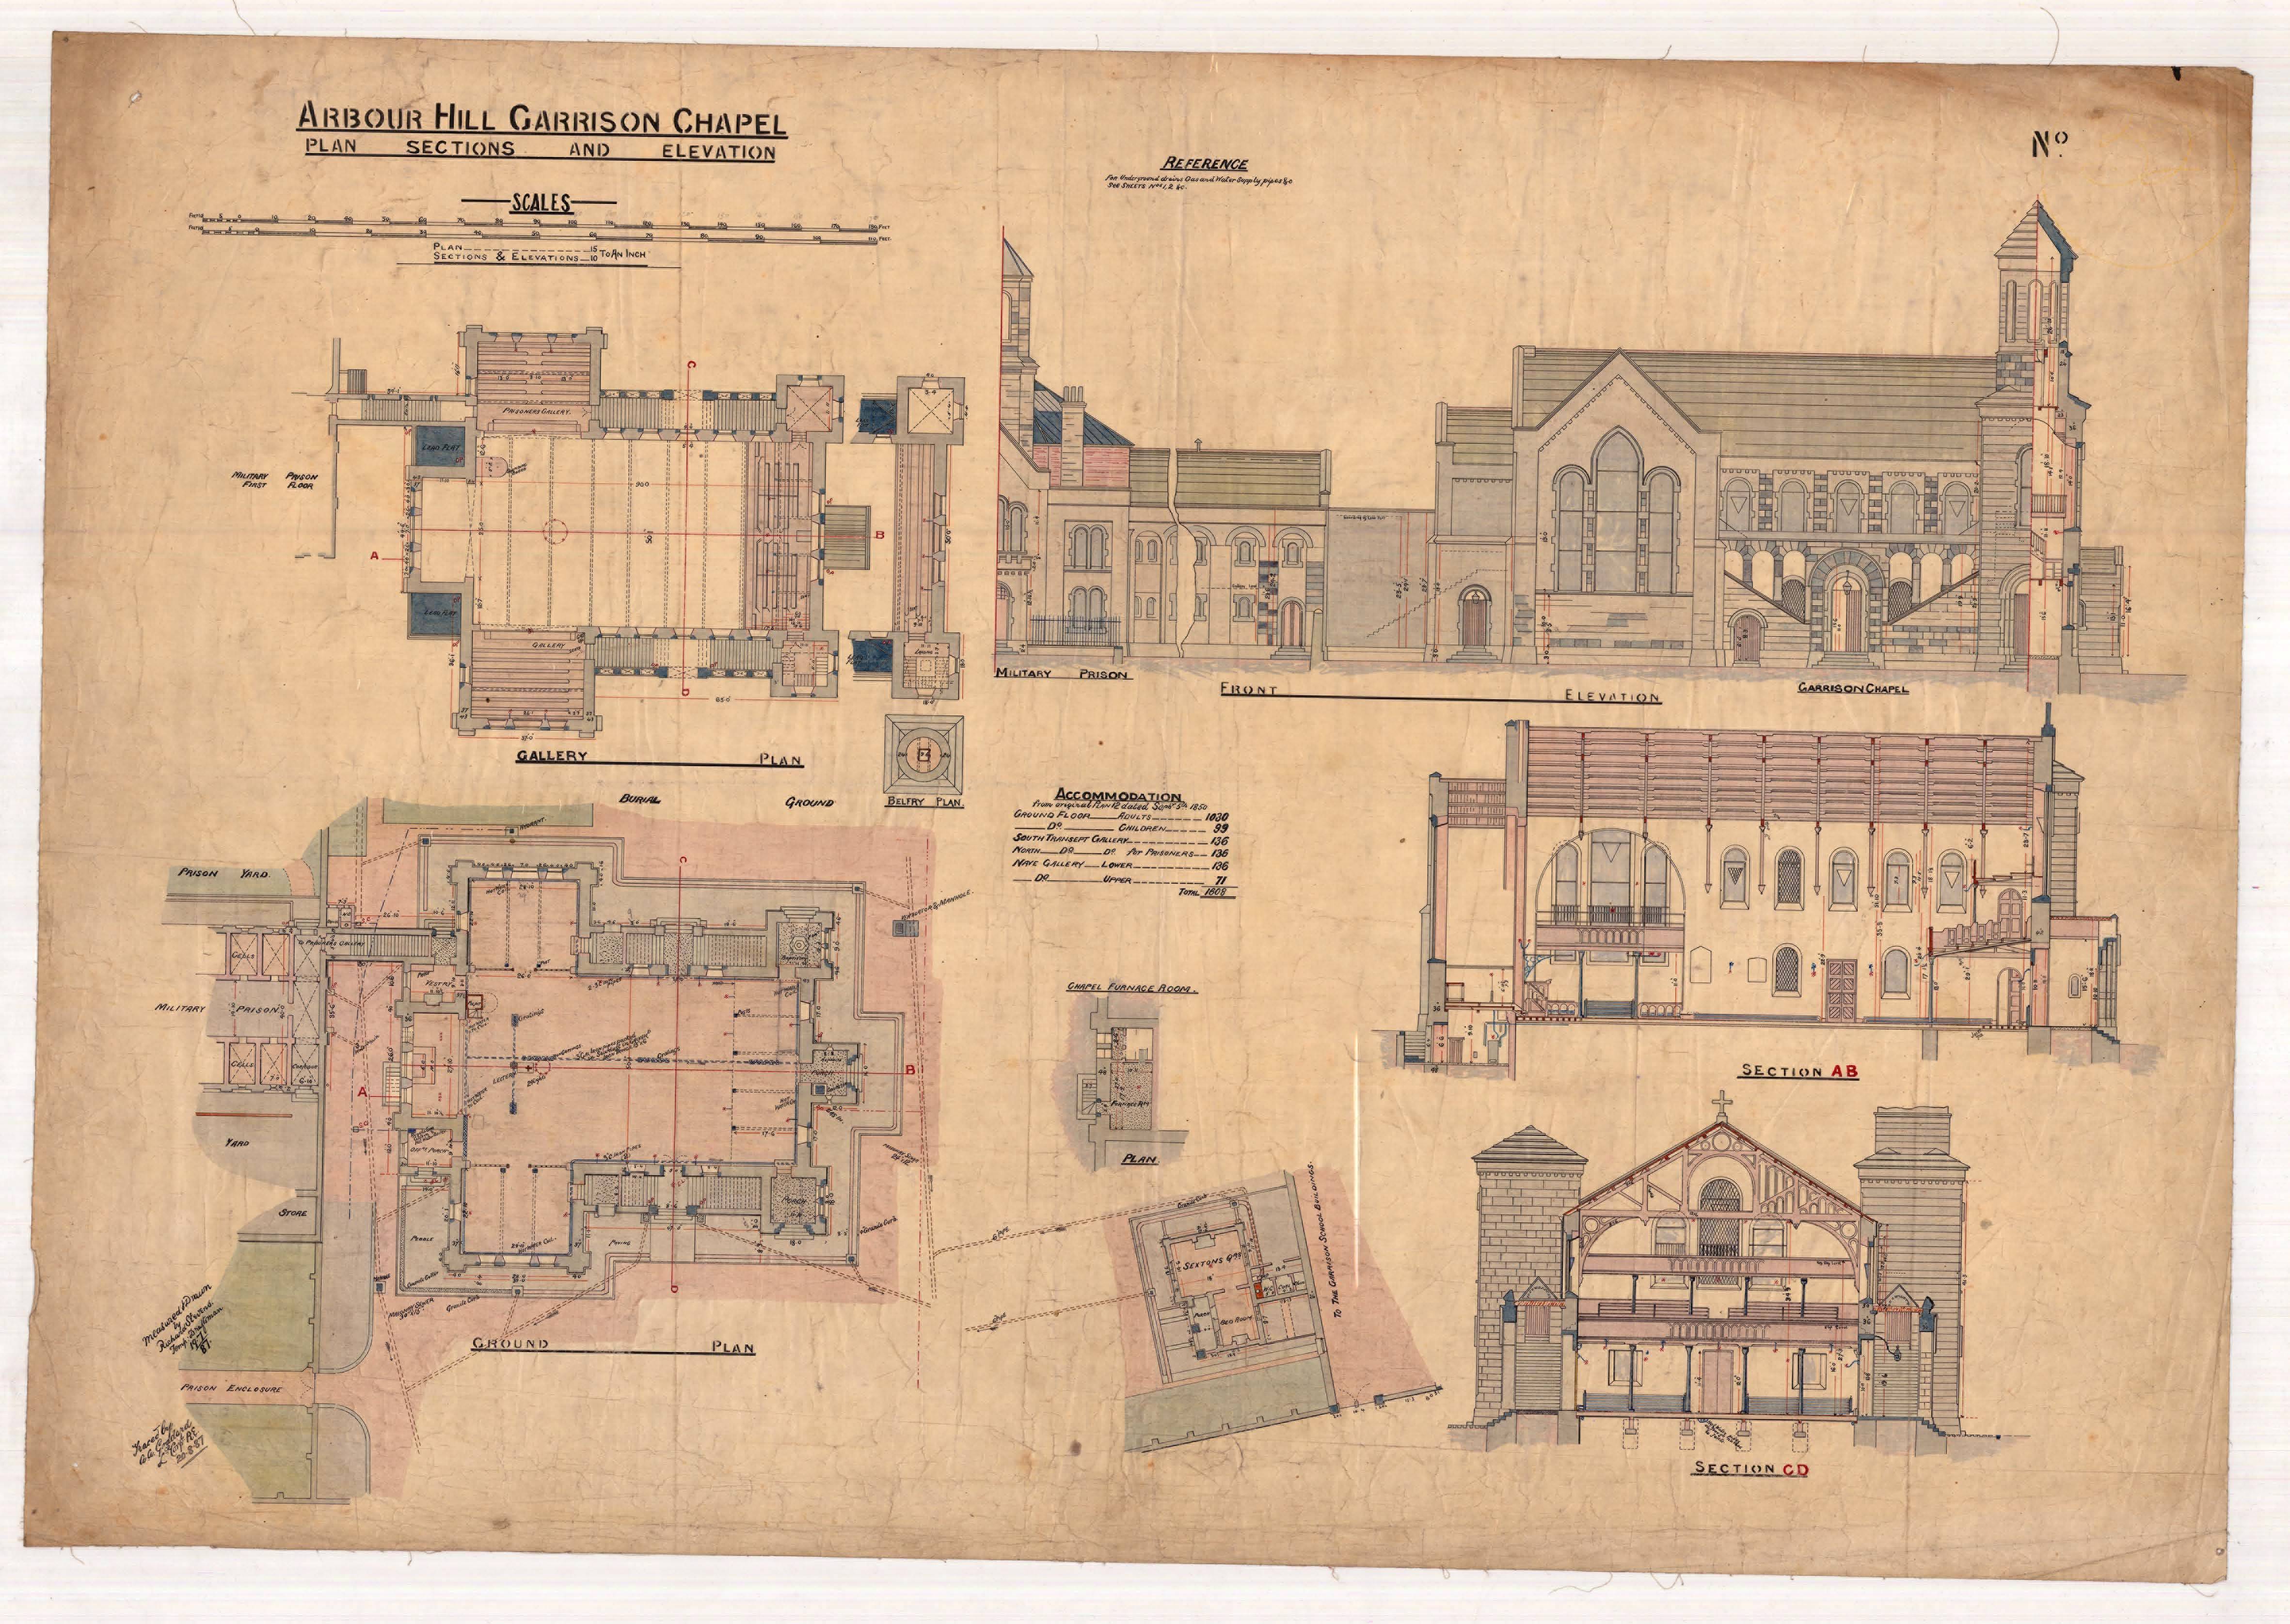 Early drawings of the buildings for the Arbour Hill site. Courtesy of the Maps, Plans, and Drawings section of the Military Archives (item IE/MA/MPD/AD119378-002).